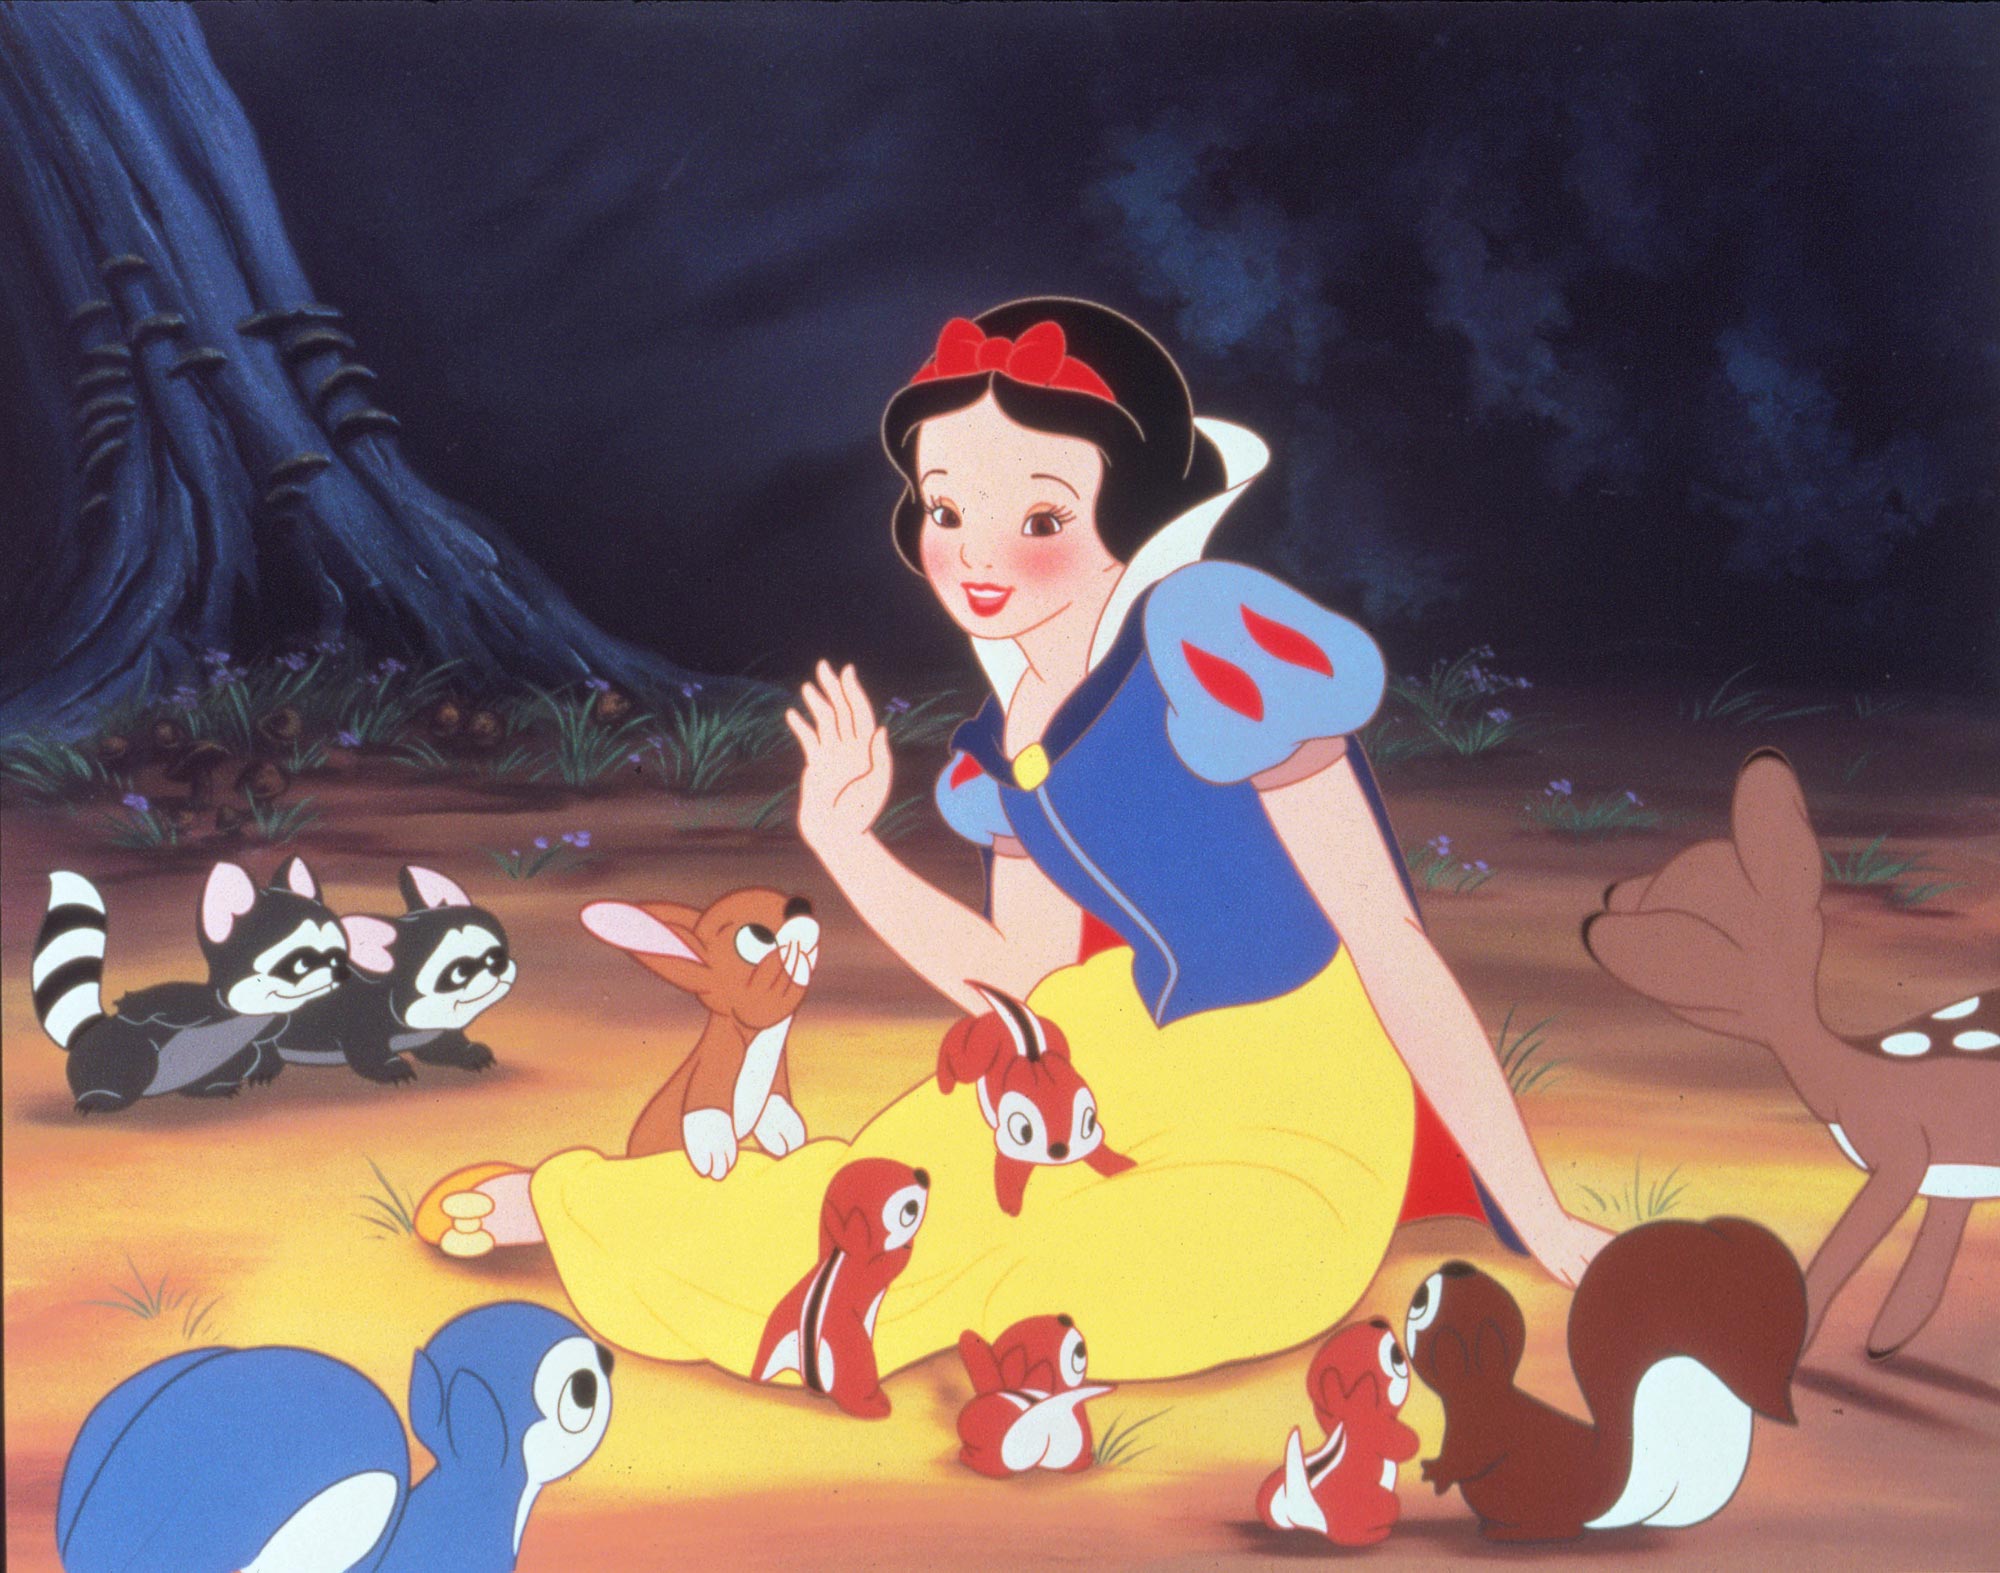 Son of the Original Snow White Director Woke and Pathetic Remake 397